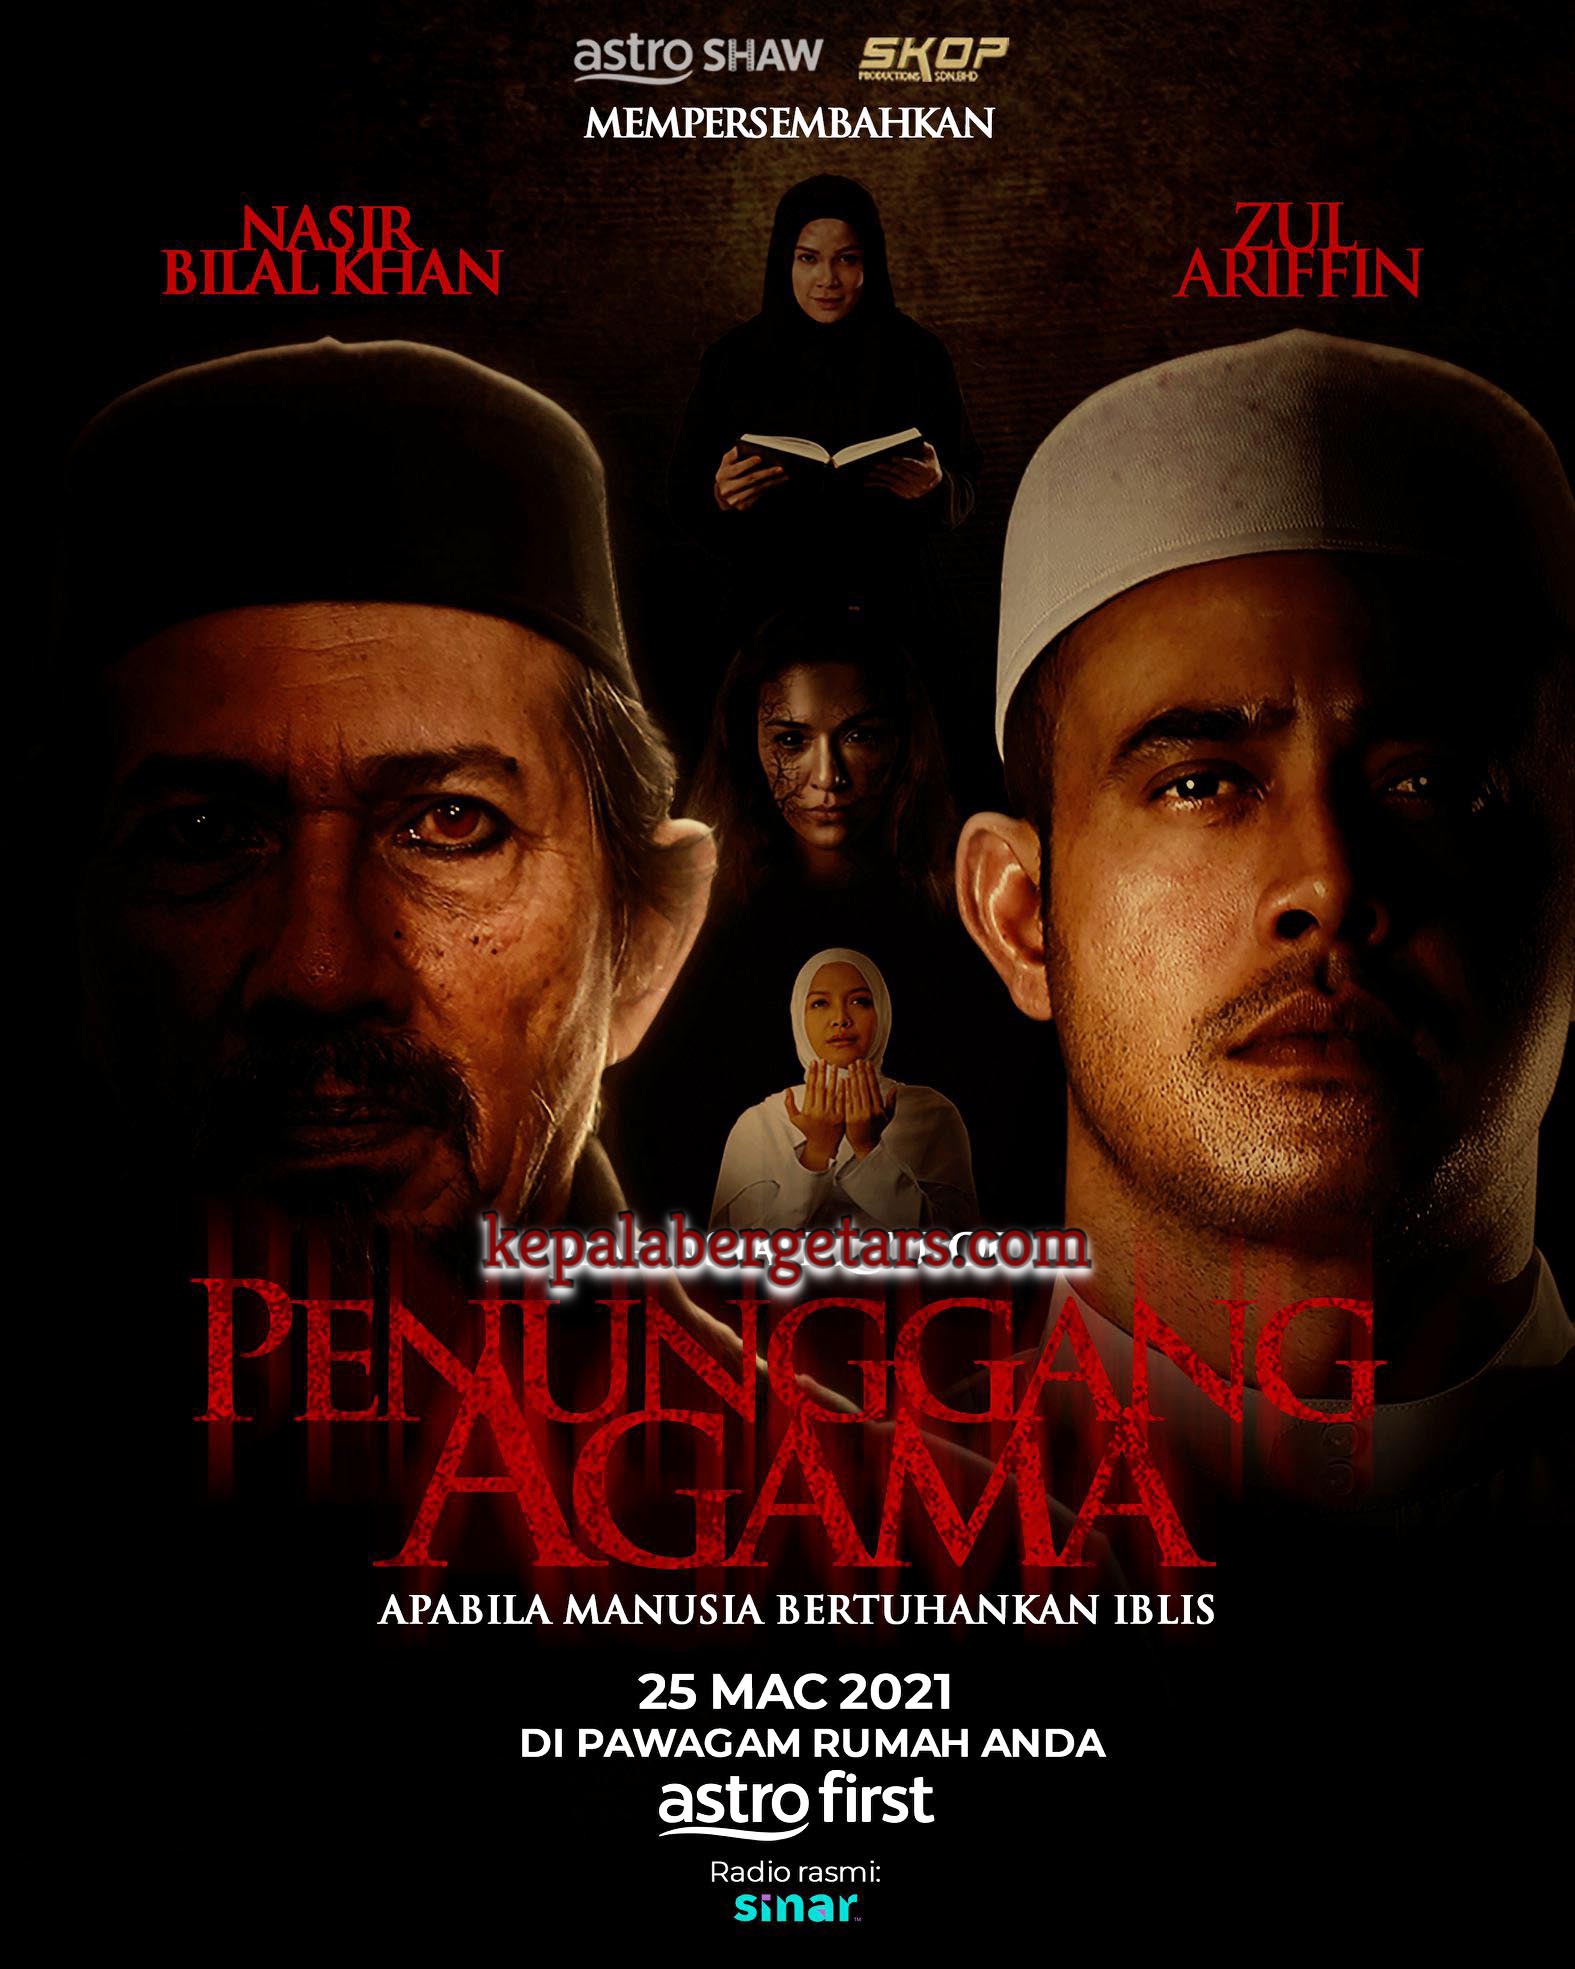 Penunggang Agama Live filem Astro First